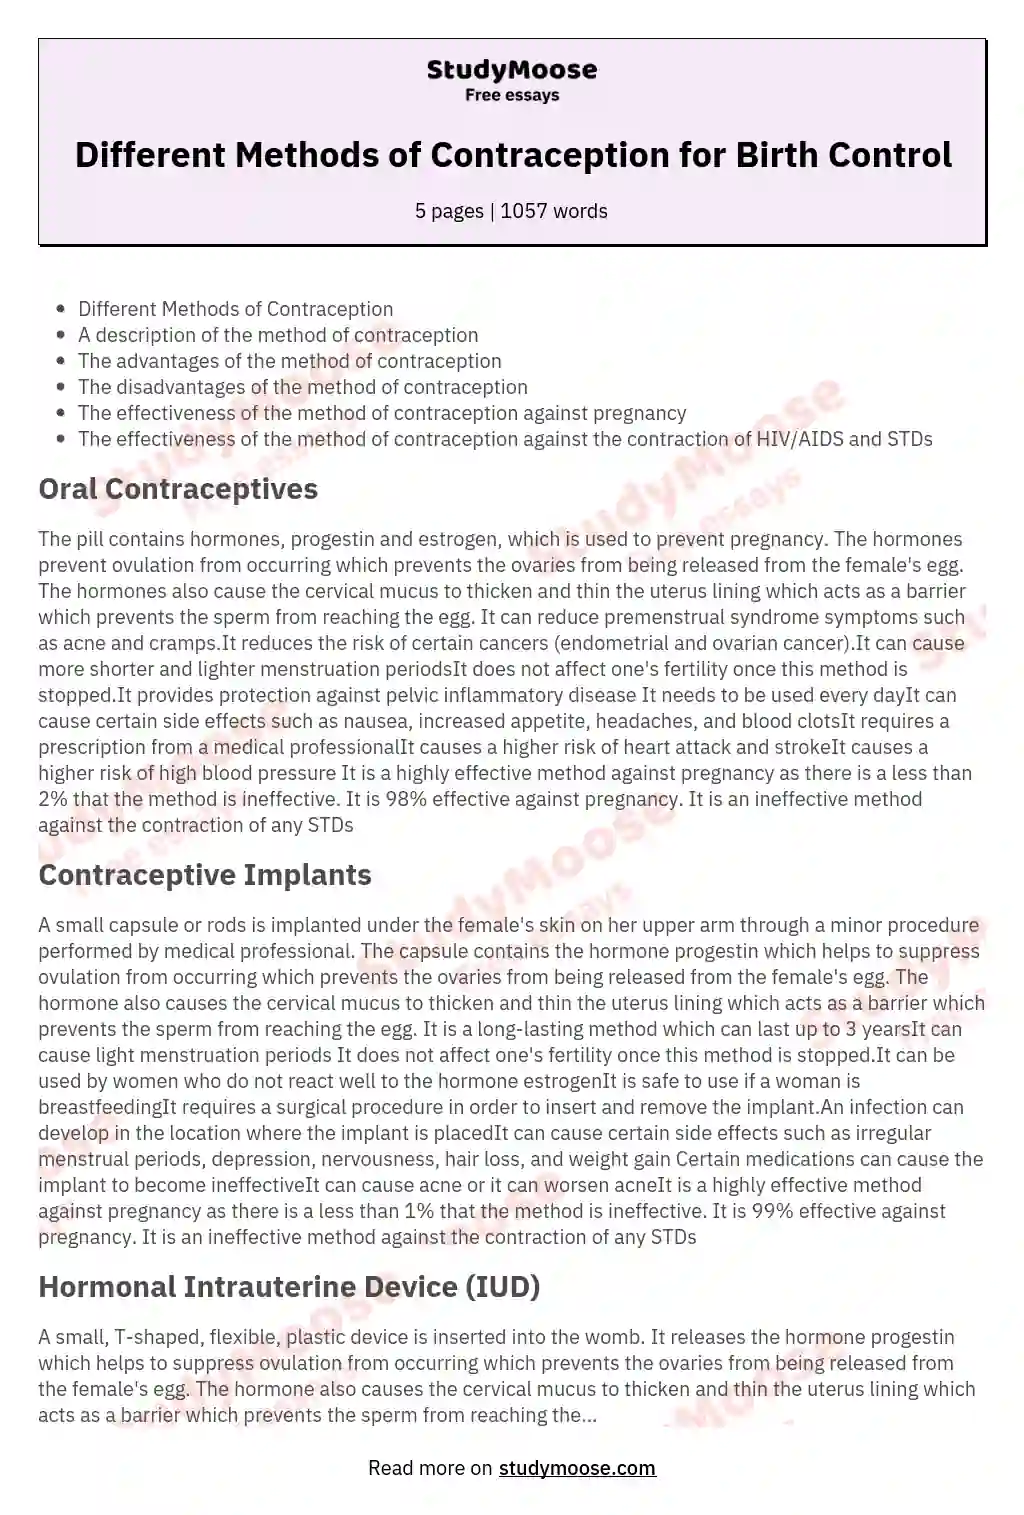 Different Methods of Contraception for Birth Control essay